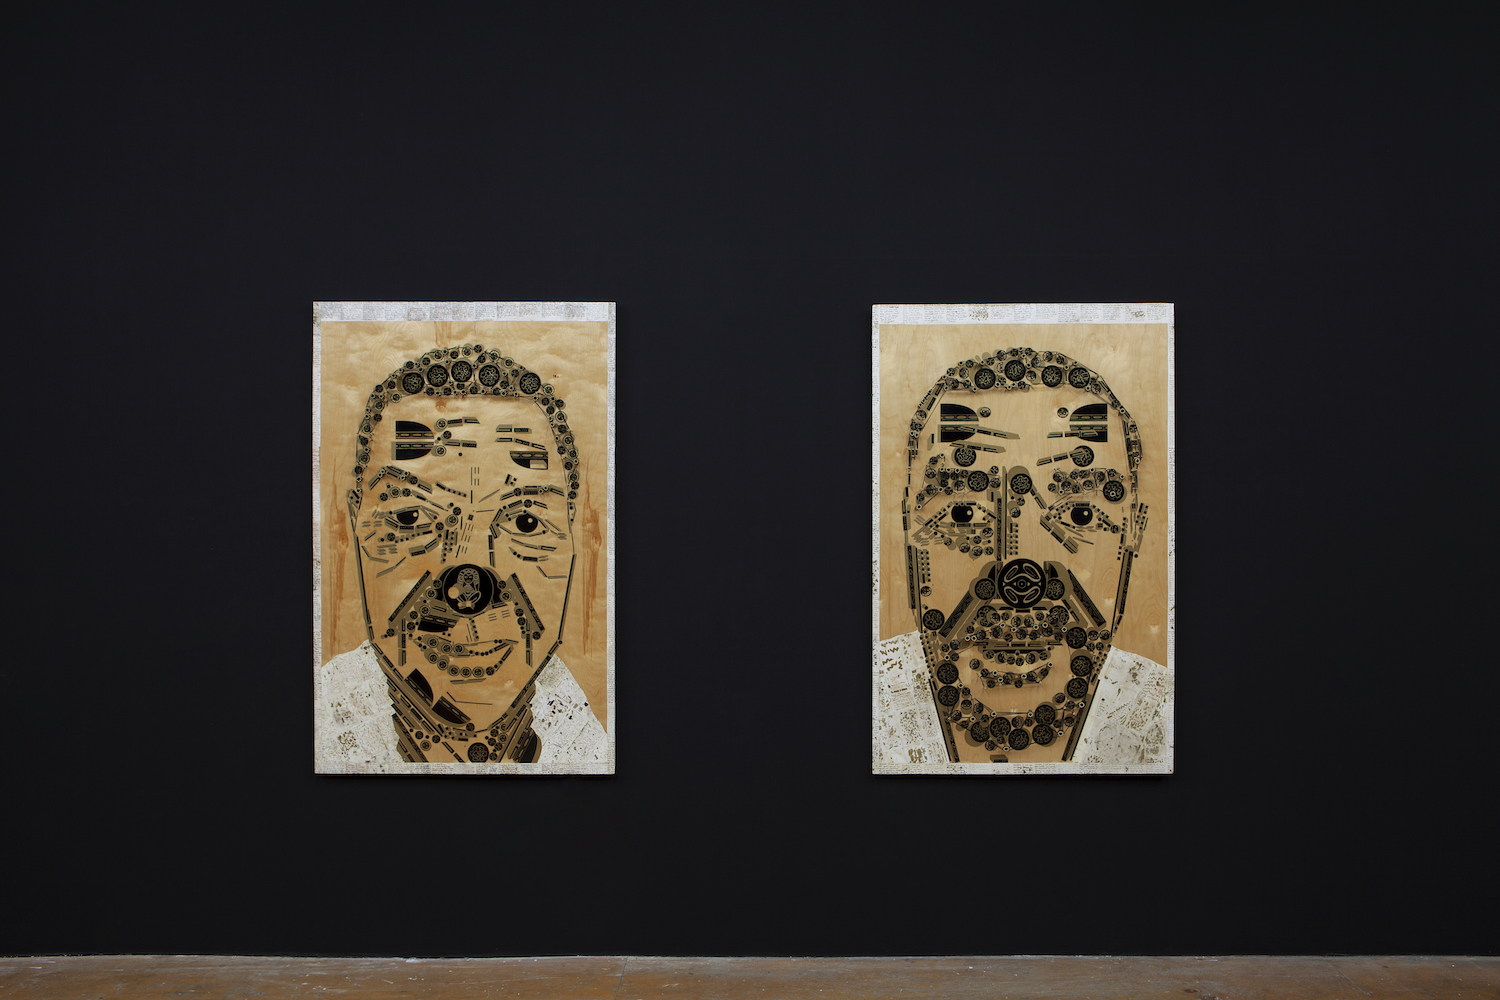 Glendalys Medina, *Ms. Puerto Rico*, 2019 and *Mr. Borikén*, 2019. Both paper, marker, nails, and thread, 63 x 40.5 inches each